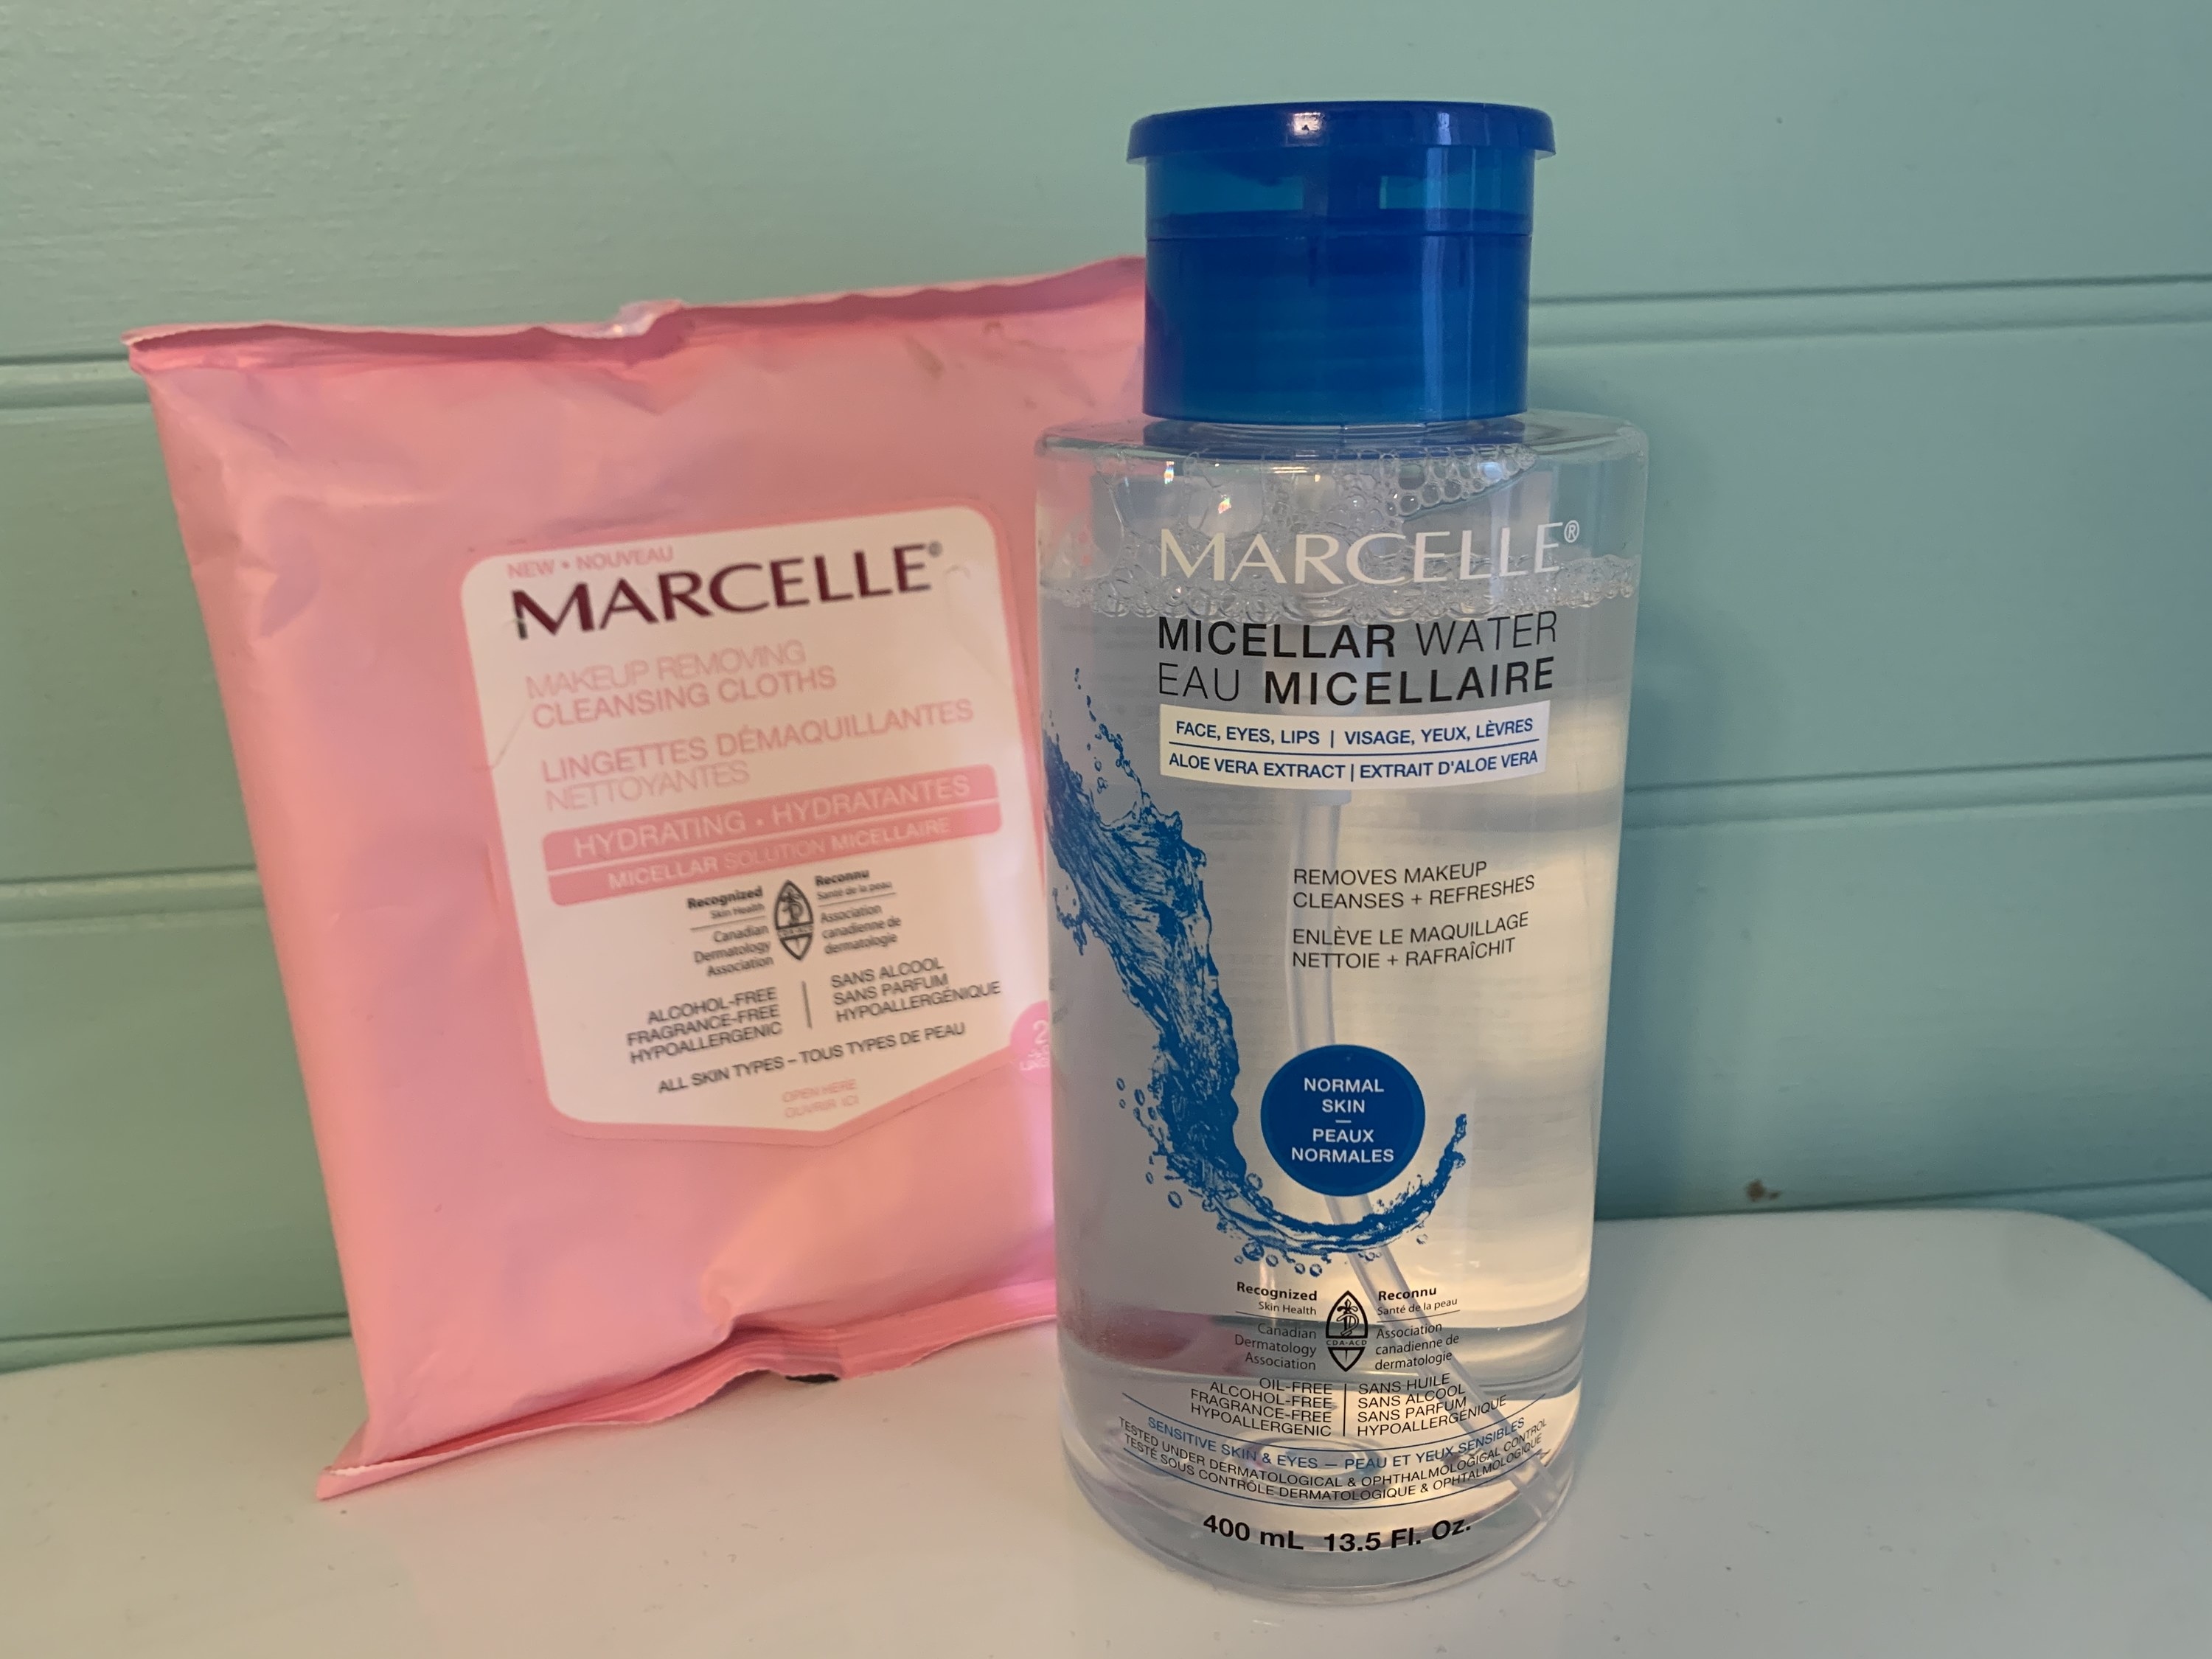 The makeup wipes and bottle of micellar water